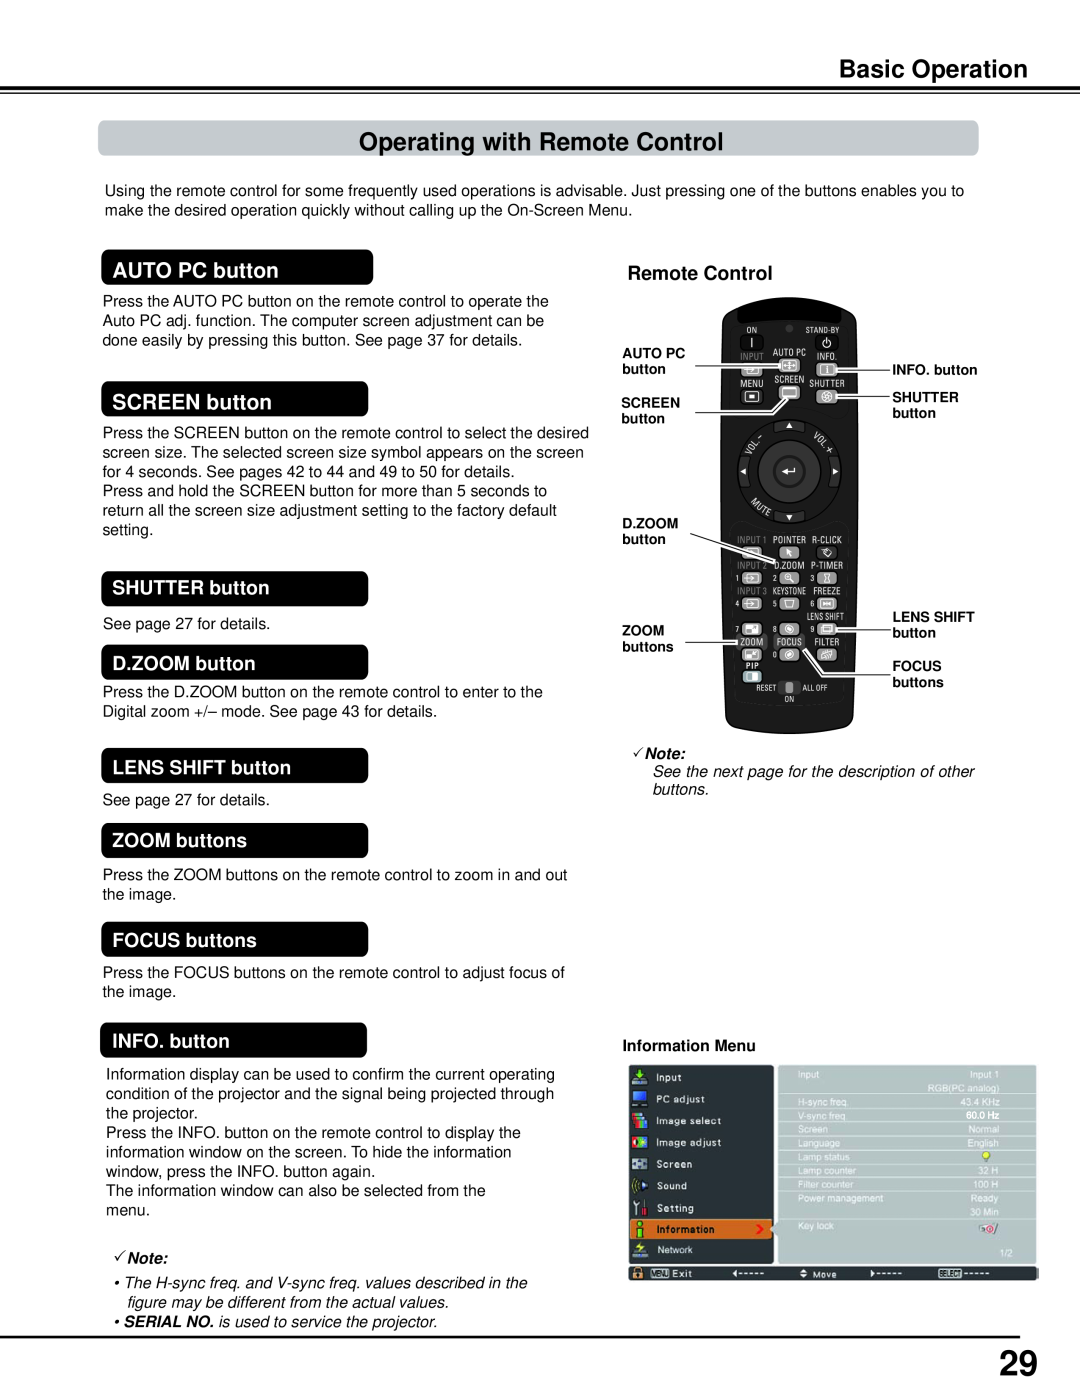 Sanyo PLC-WM5500 Basic Operation Operating with Remote Control, AUTO PC button, SCREEN button, SHUTTER button, Note 